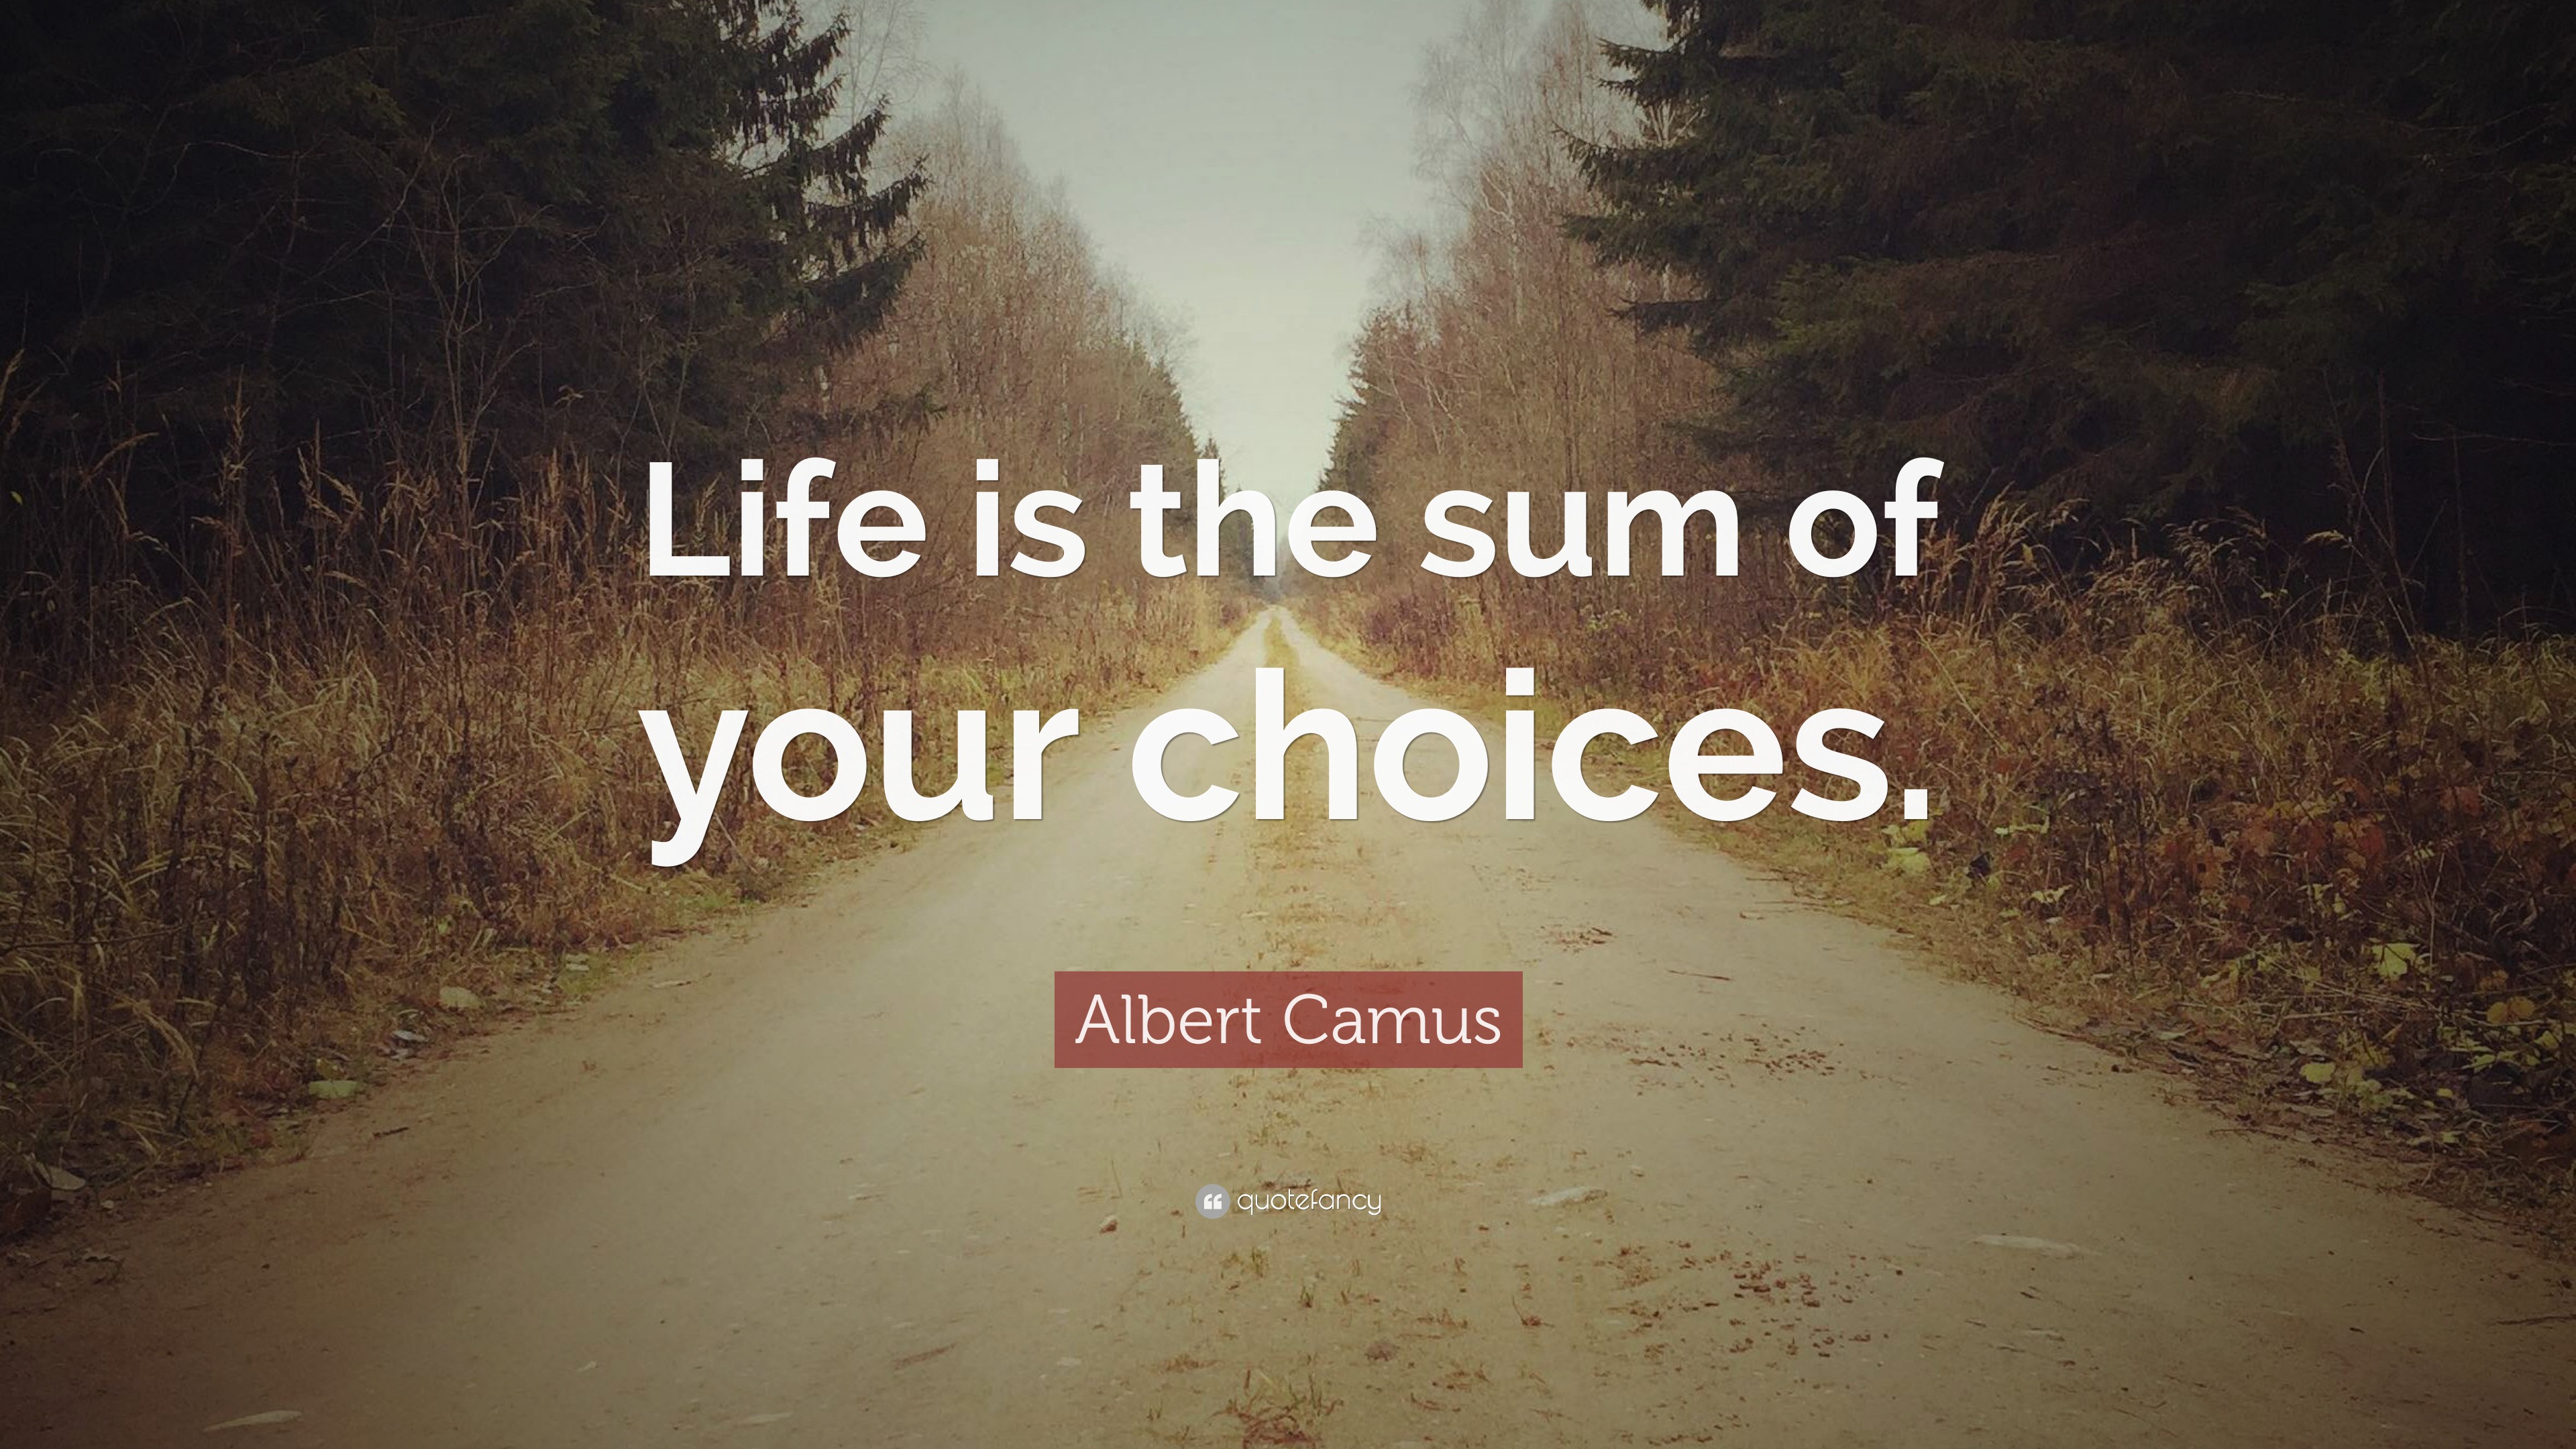 Albert Camus Quote: "Life is the sum of your choices." (12 ...